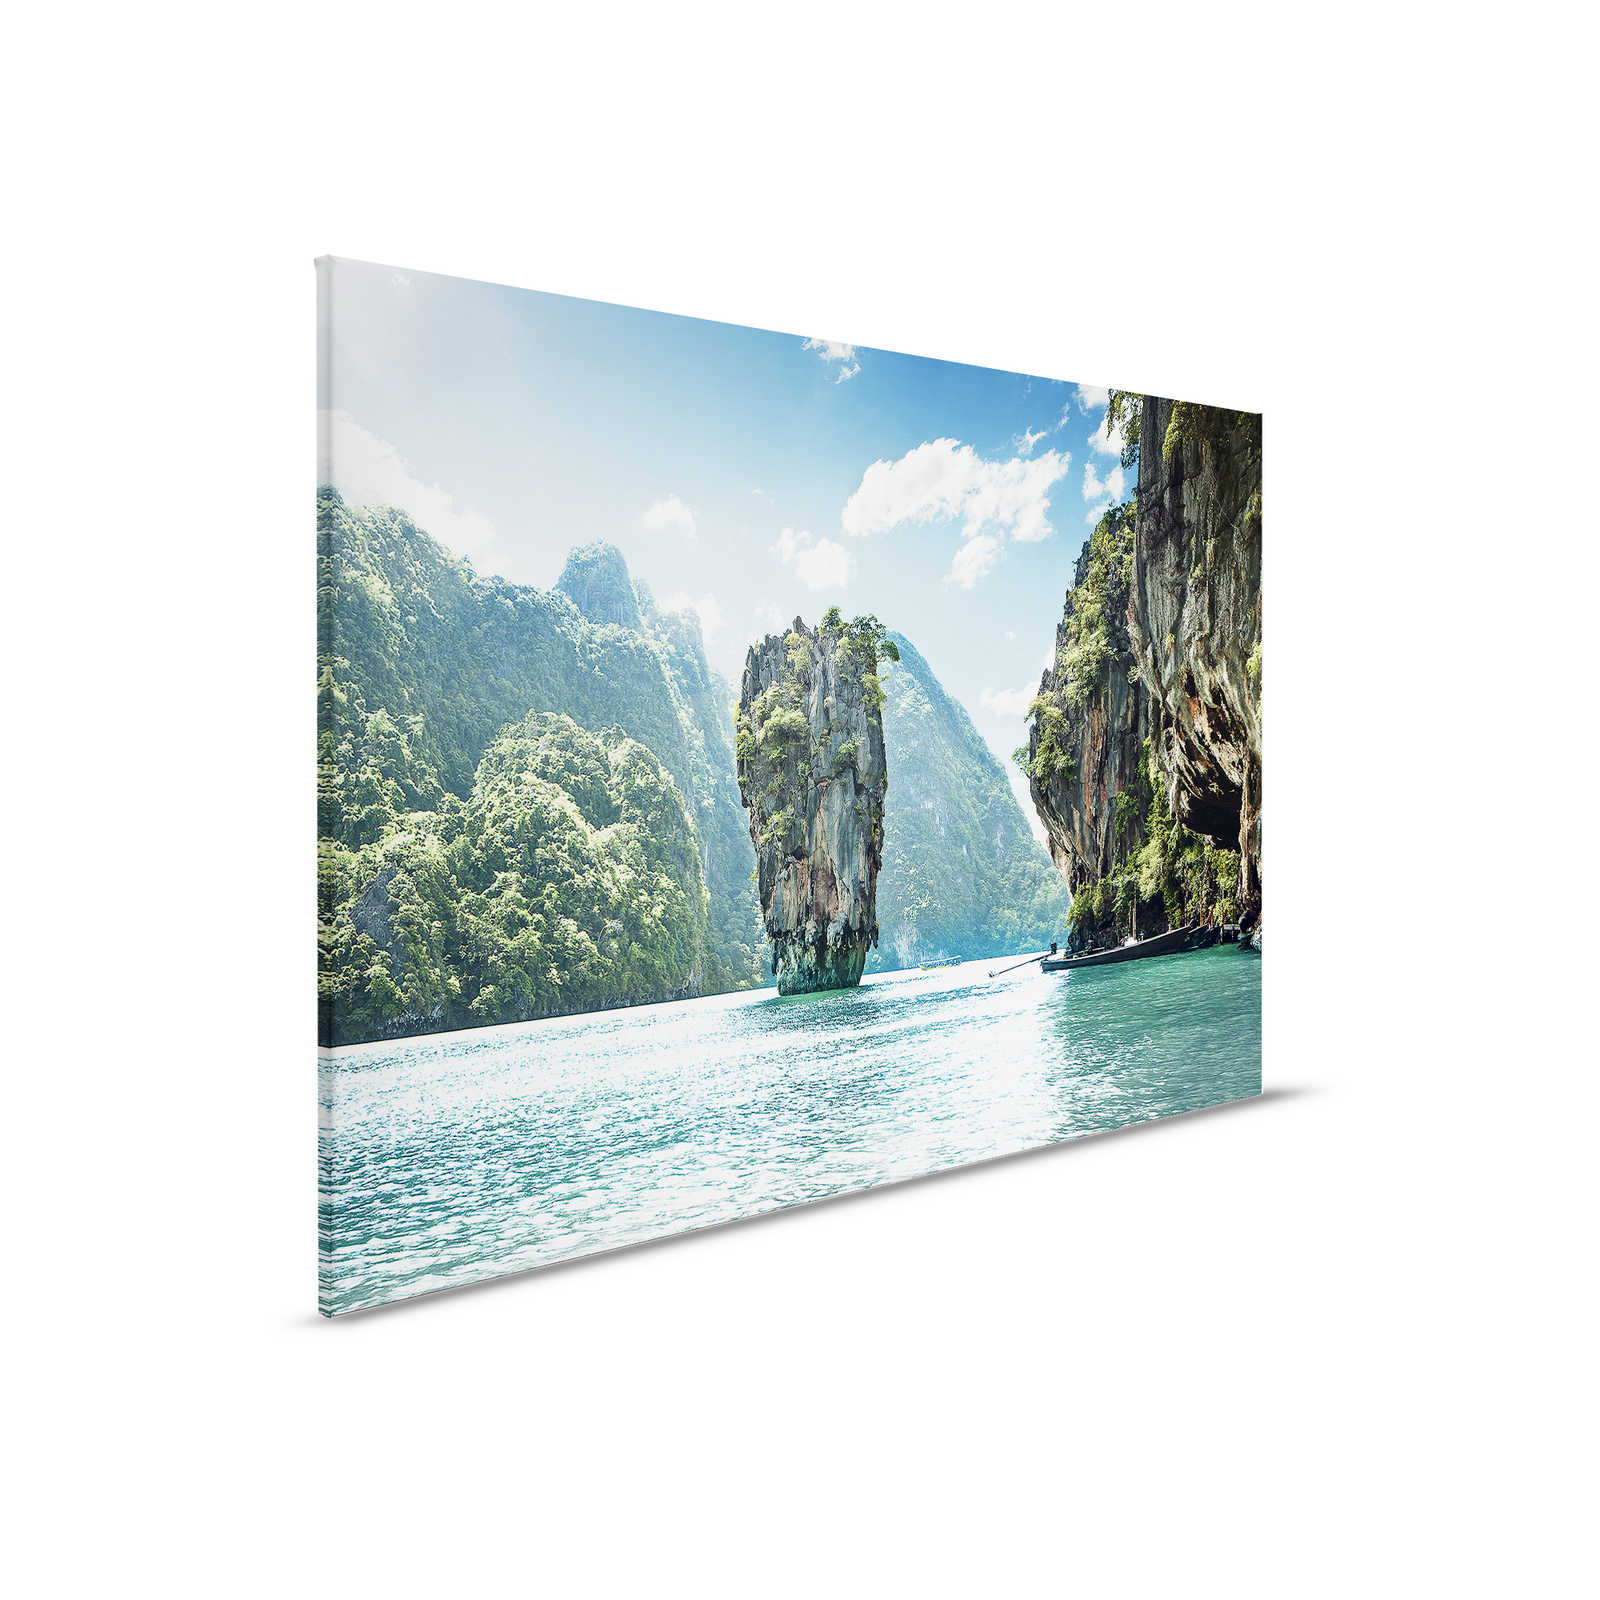         Canvas painting with paradise view of mountain landscape in Thailand - 0.90 m x 0.60 m
    